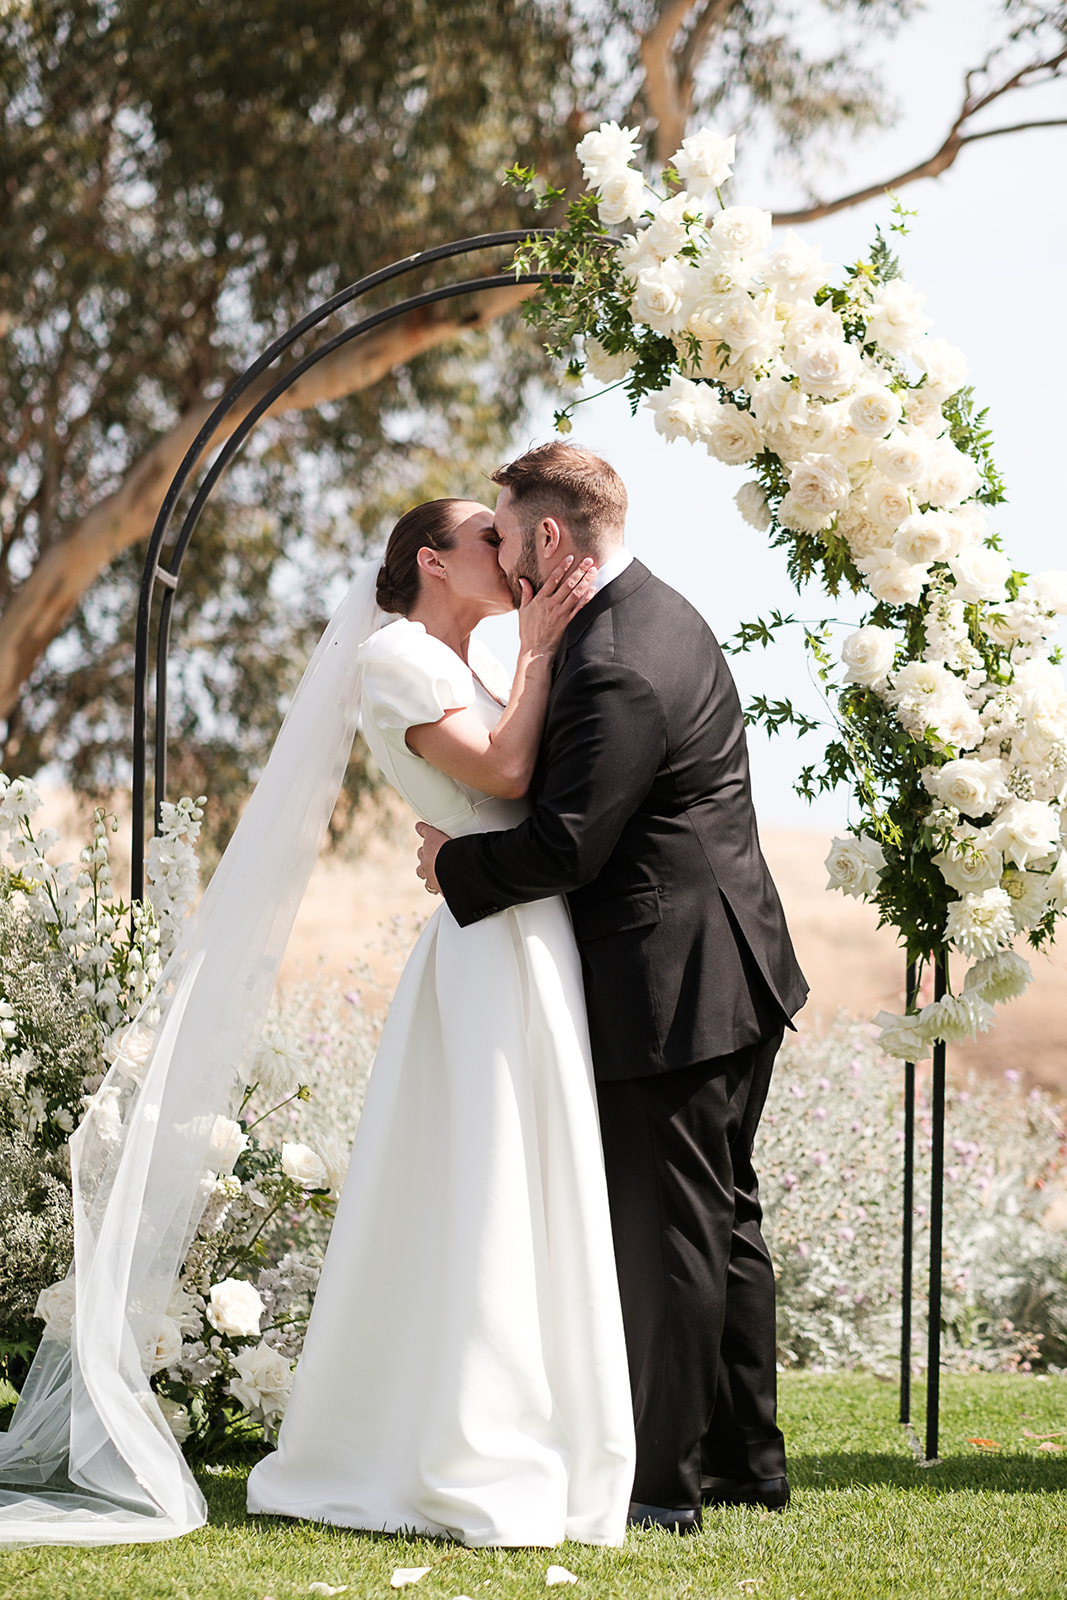 Bride and Groom seal their vows with a kiss on their wedding day at Kingsford Estate